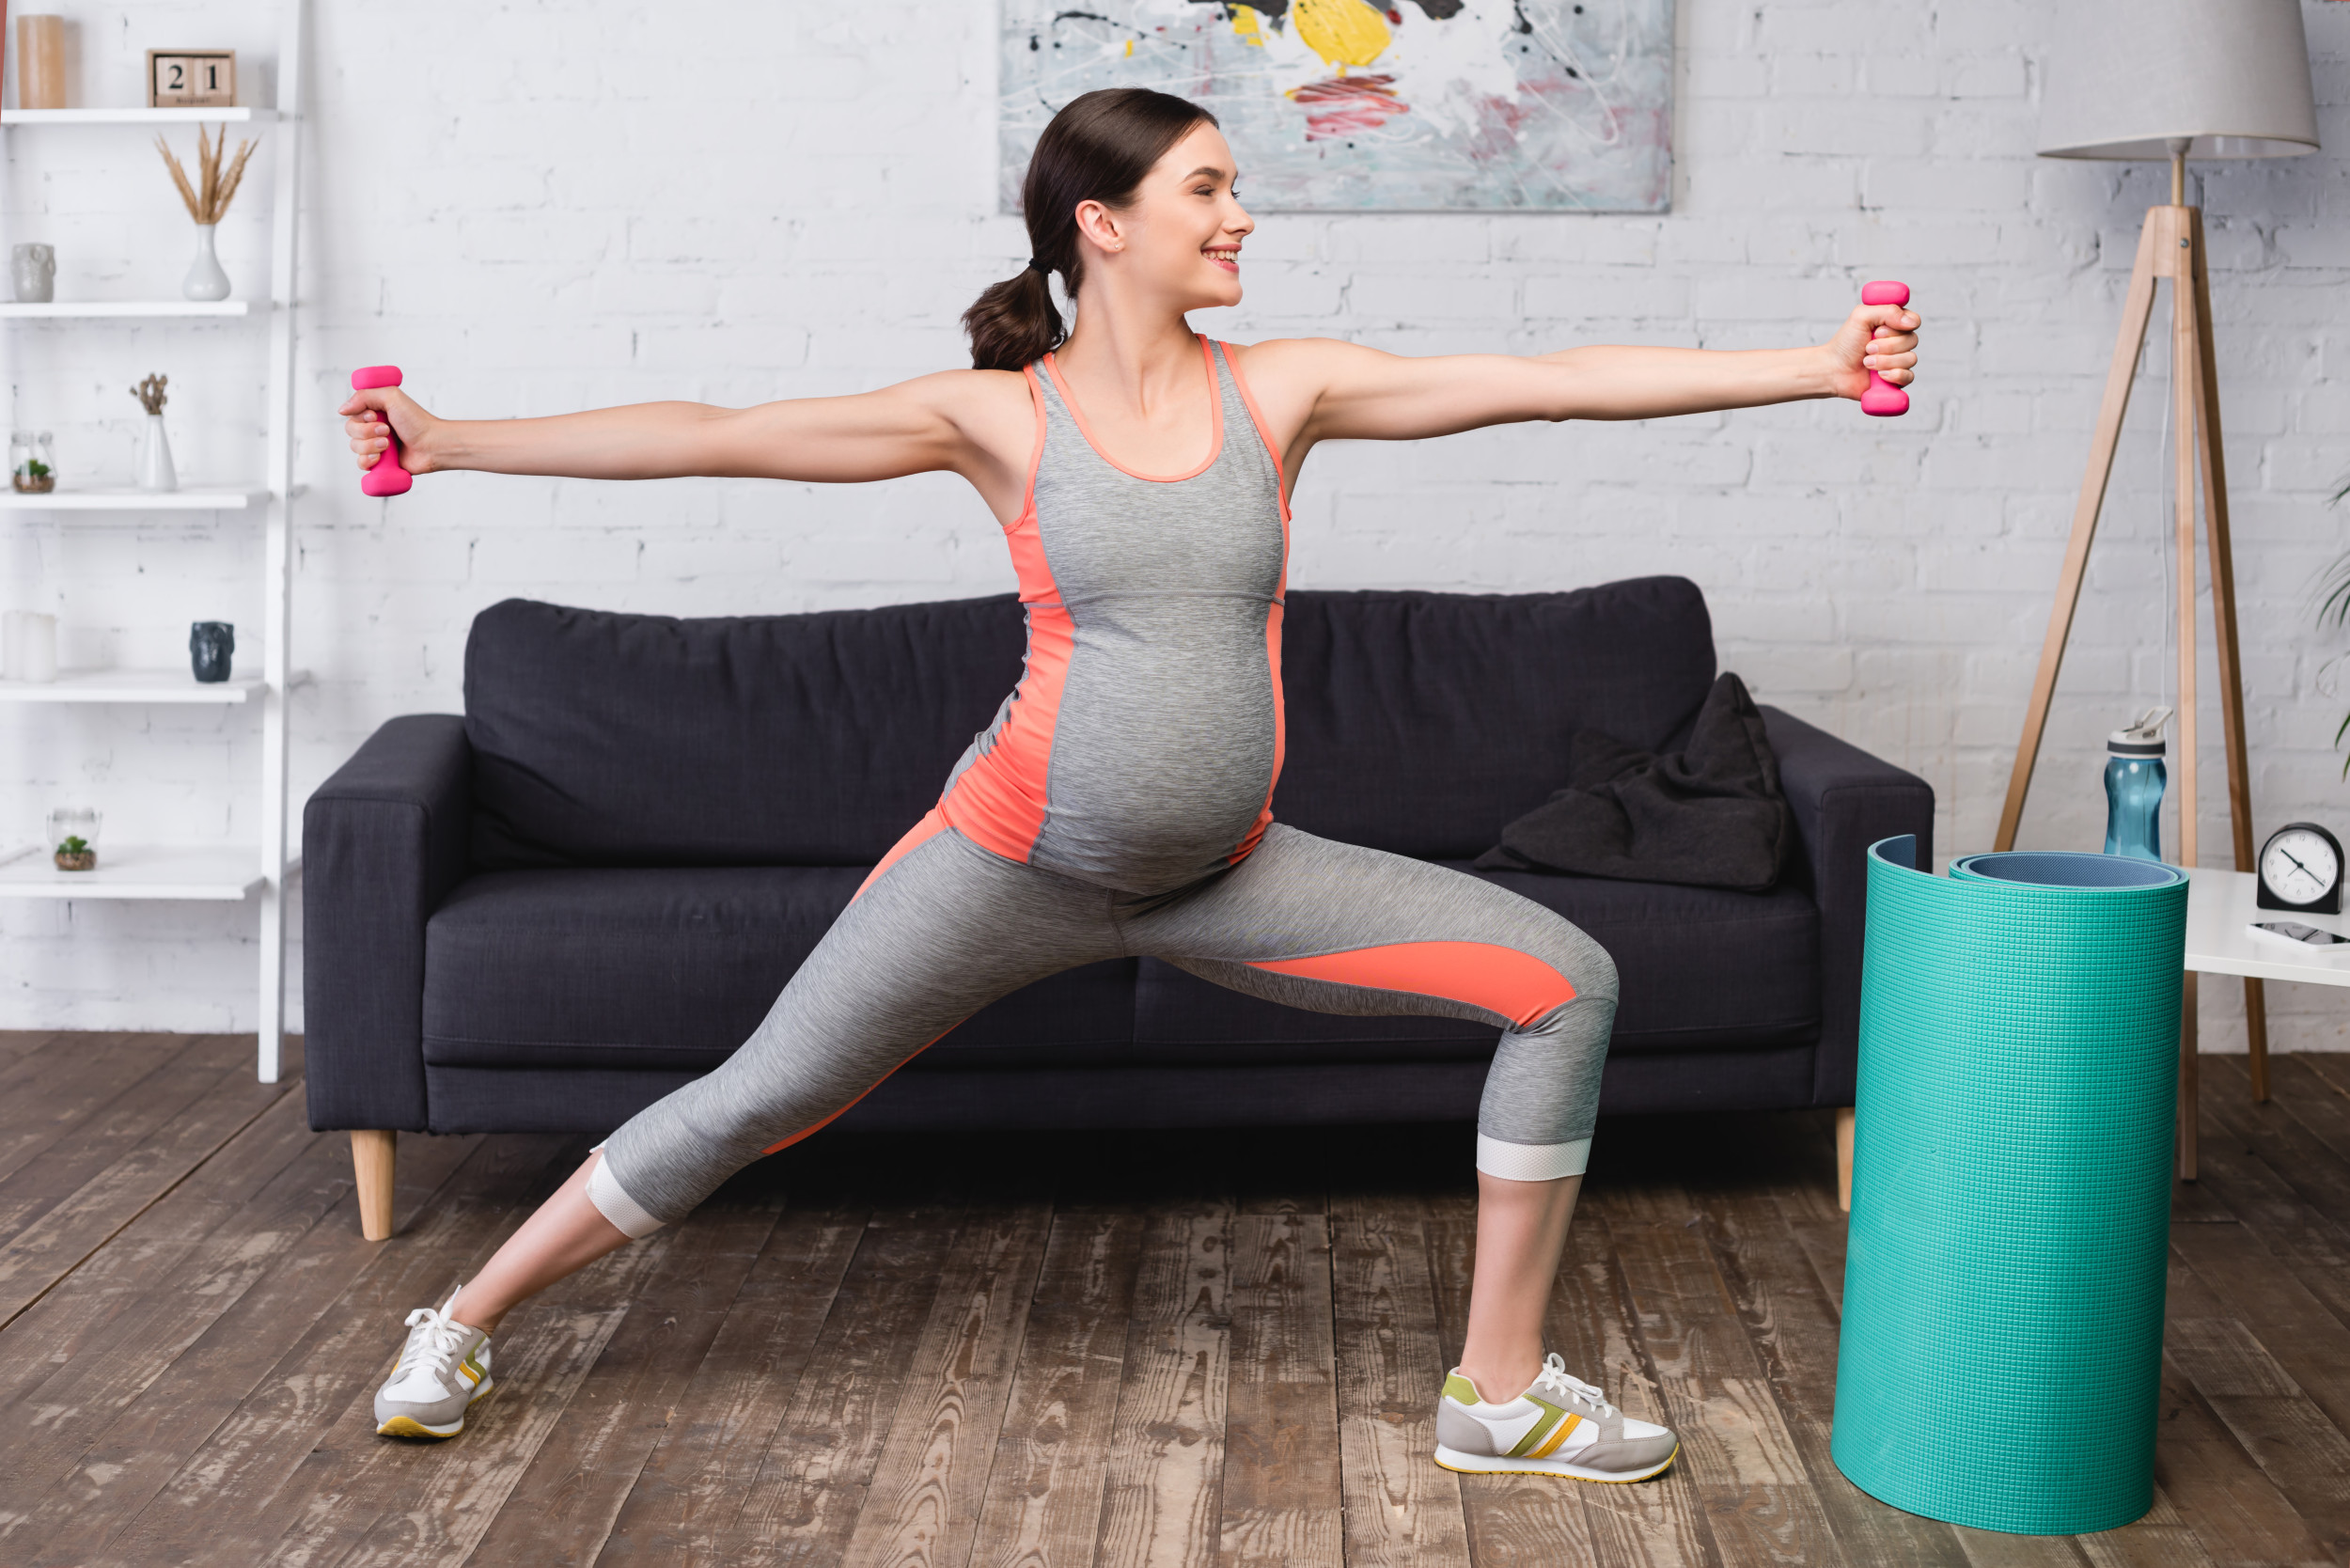 Mom Who Weight Lifted During Pregnancy Shows Off Her Baby's 'Muscle